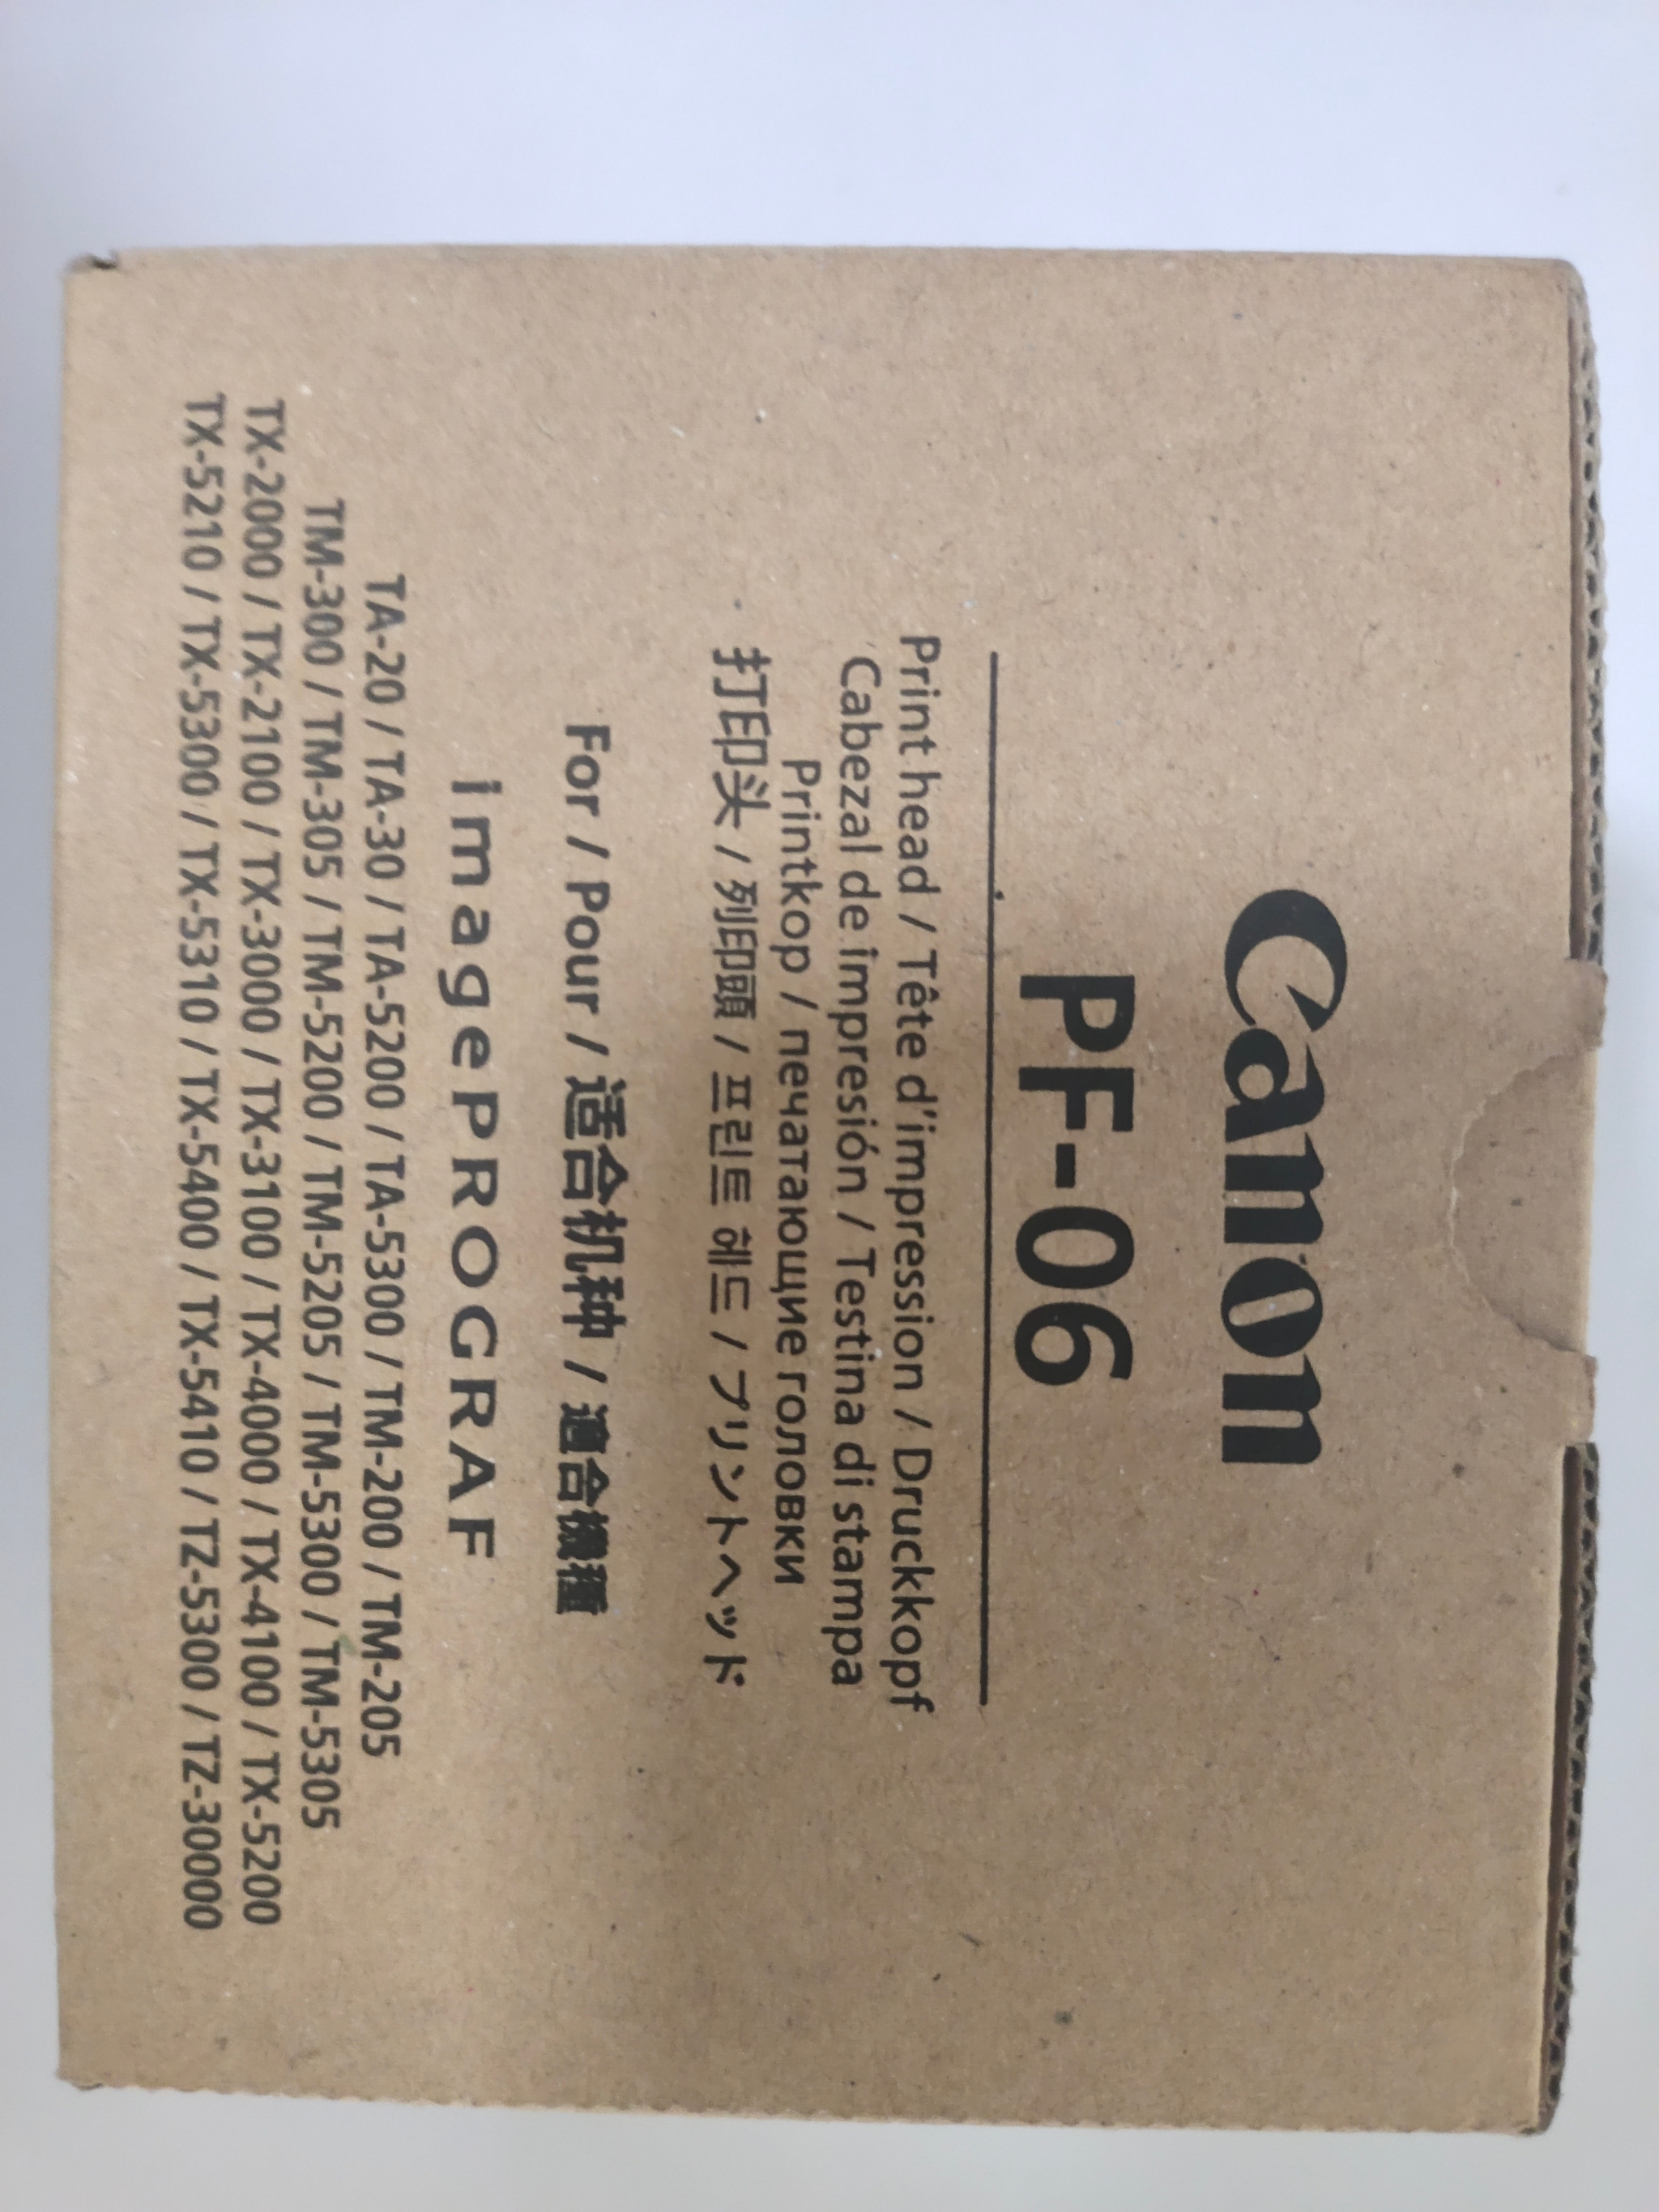 Canon PF-06 Printhead – Rs.22000 – LT Online Store Mumbai – (1.4k LIVE  Videos) ©2005 Trusted Store with 22k Customer Reviews